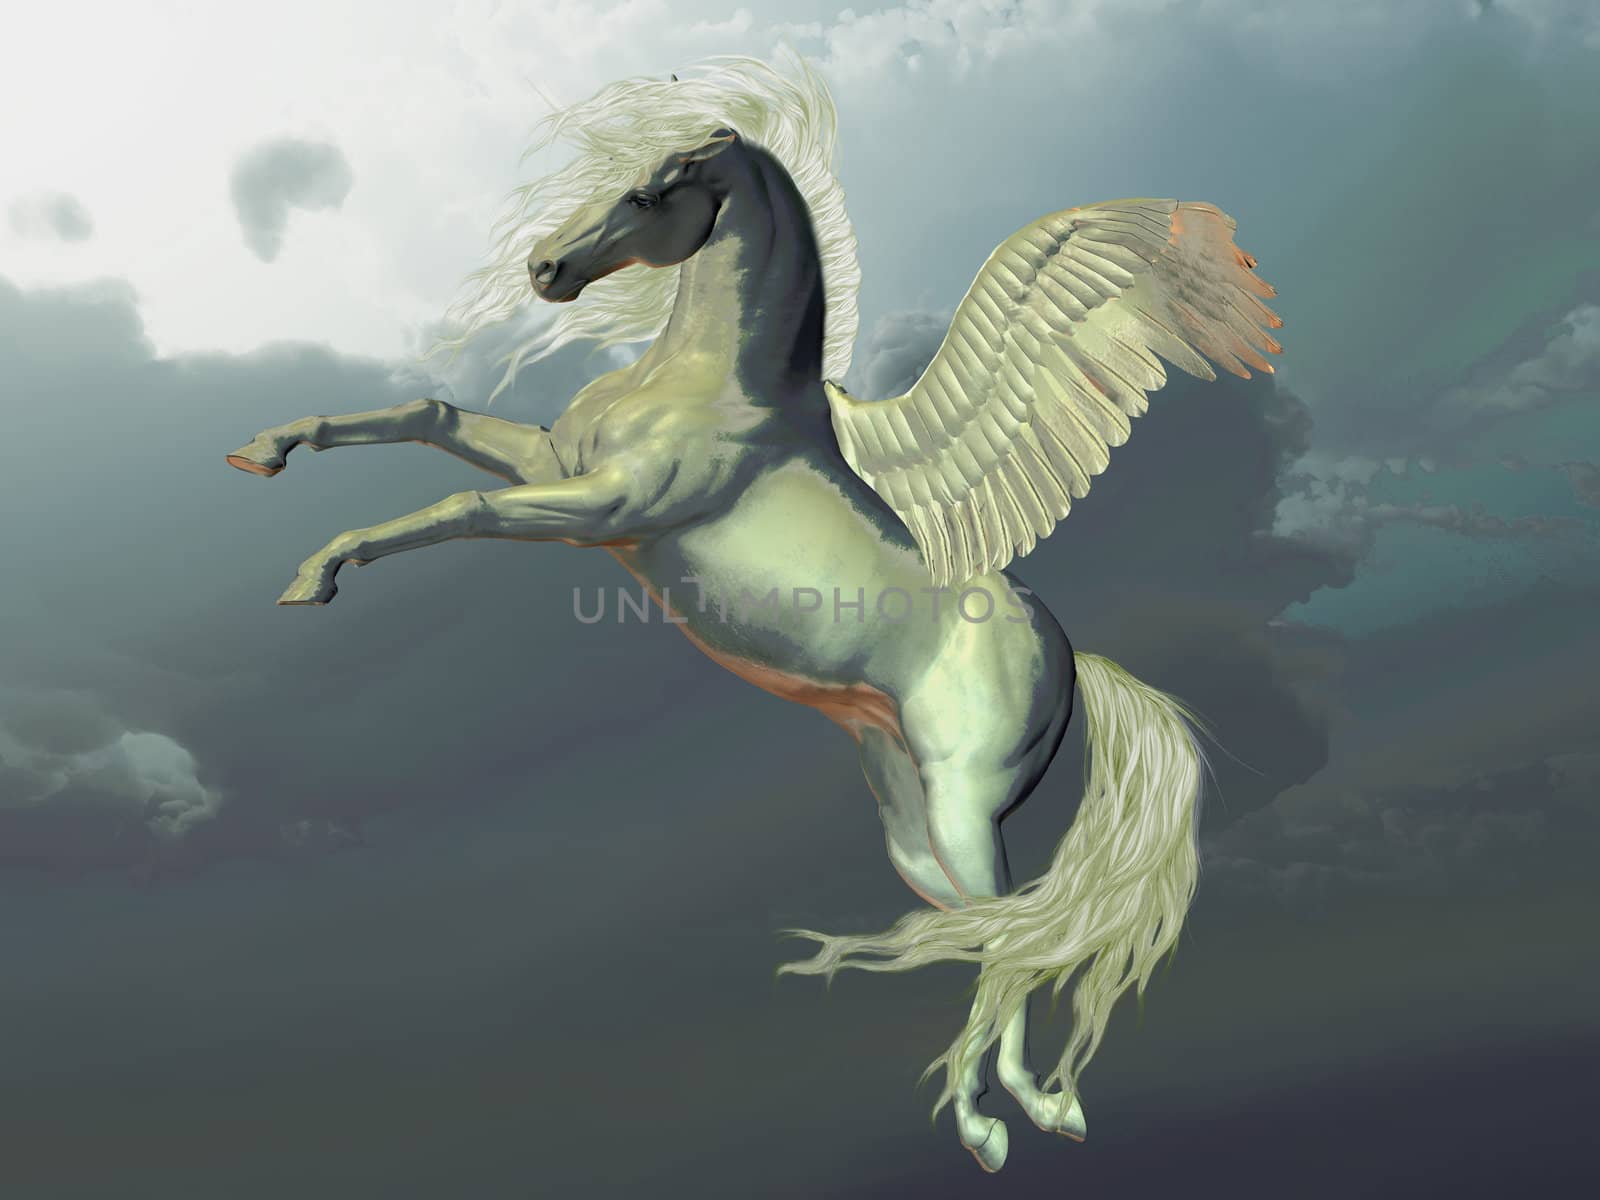 Ivory Pegasus flies up into the clouds above the Earth.